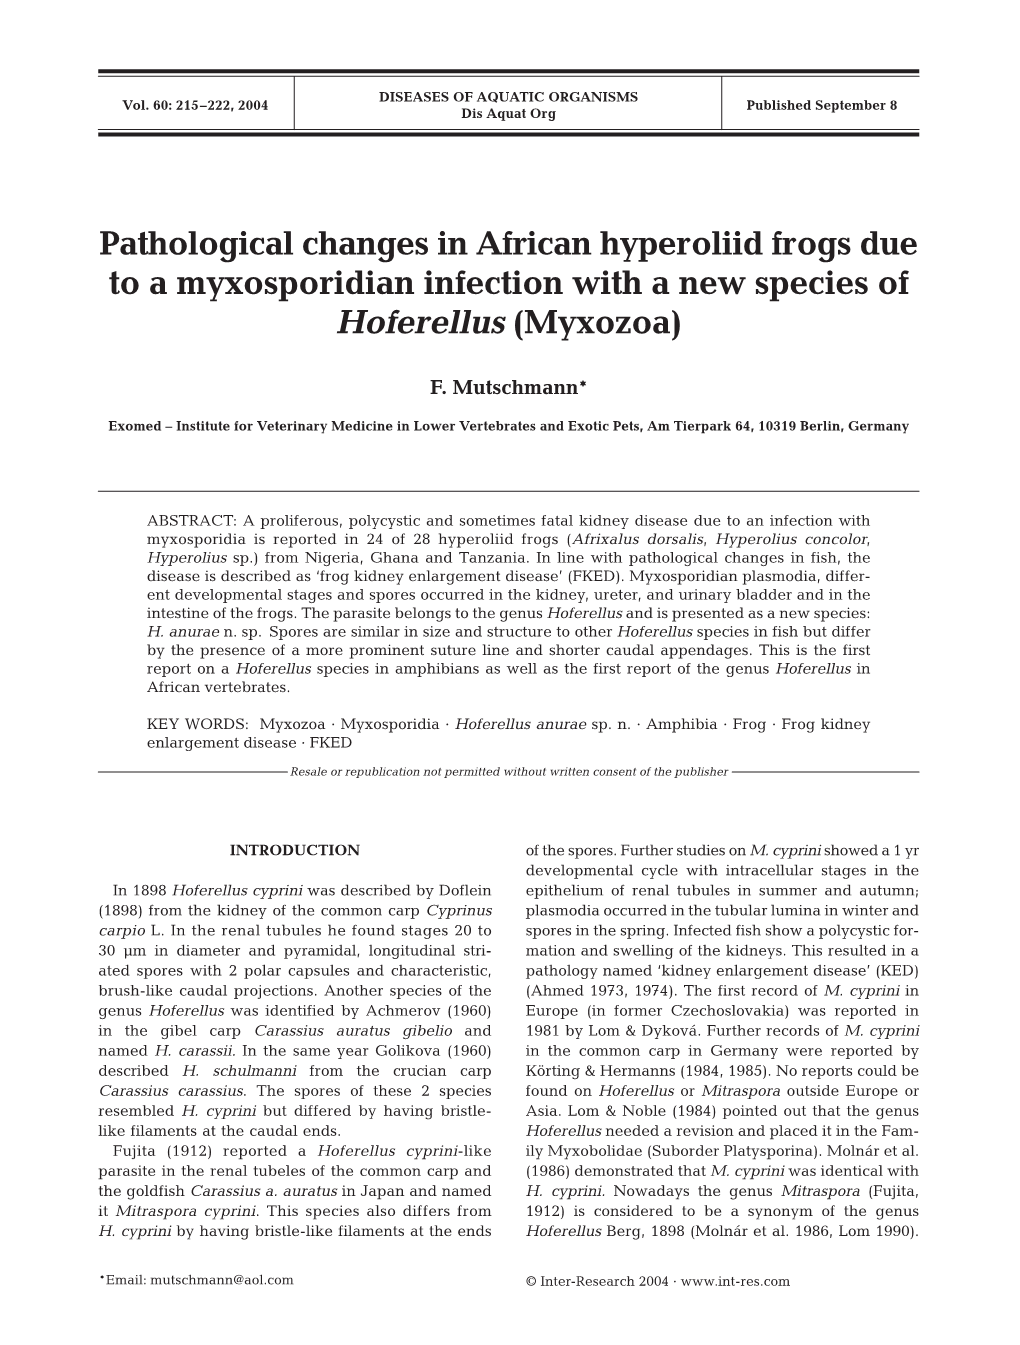 Pathological Changes in African Hyperoliid Frogs Due to a Myxosporidian Infection with a New Species of Hoferellus (Myxozoa)